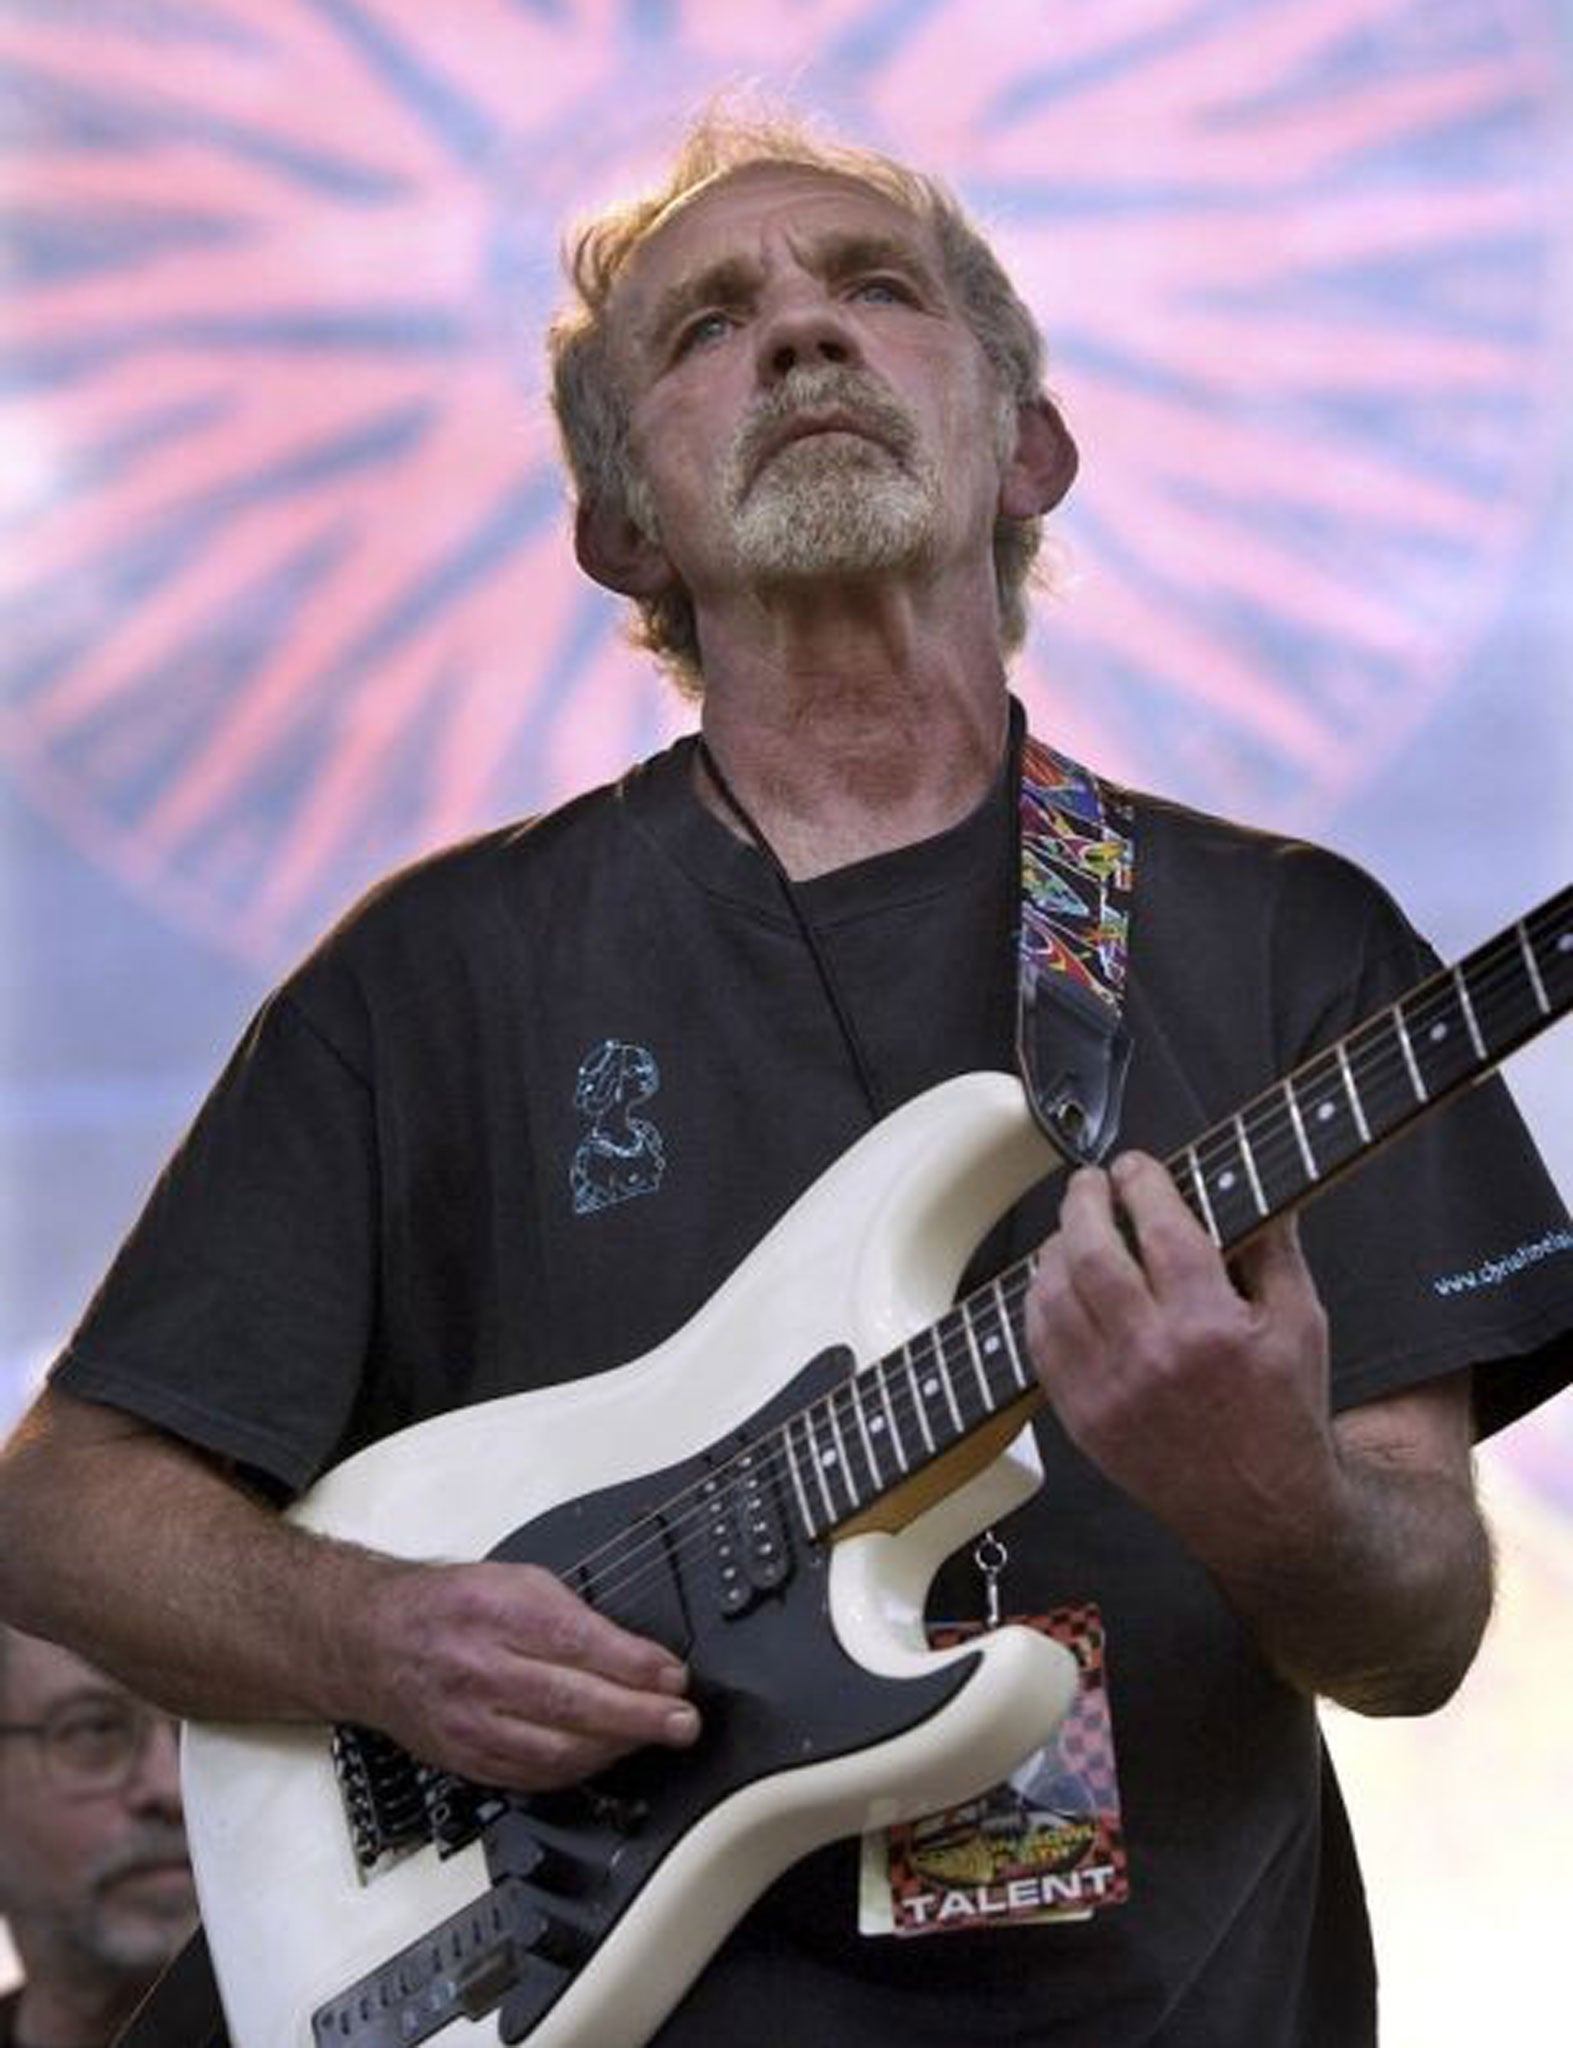 JJ Cale: Eric Clapton referred to him as 'one of the most important artists in the history of rock'